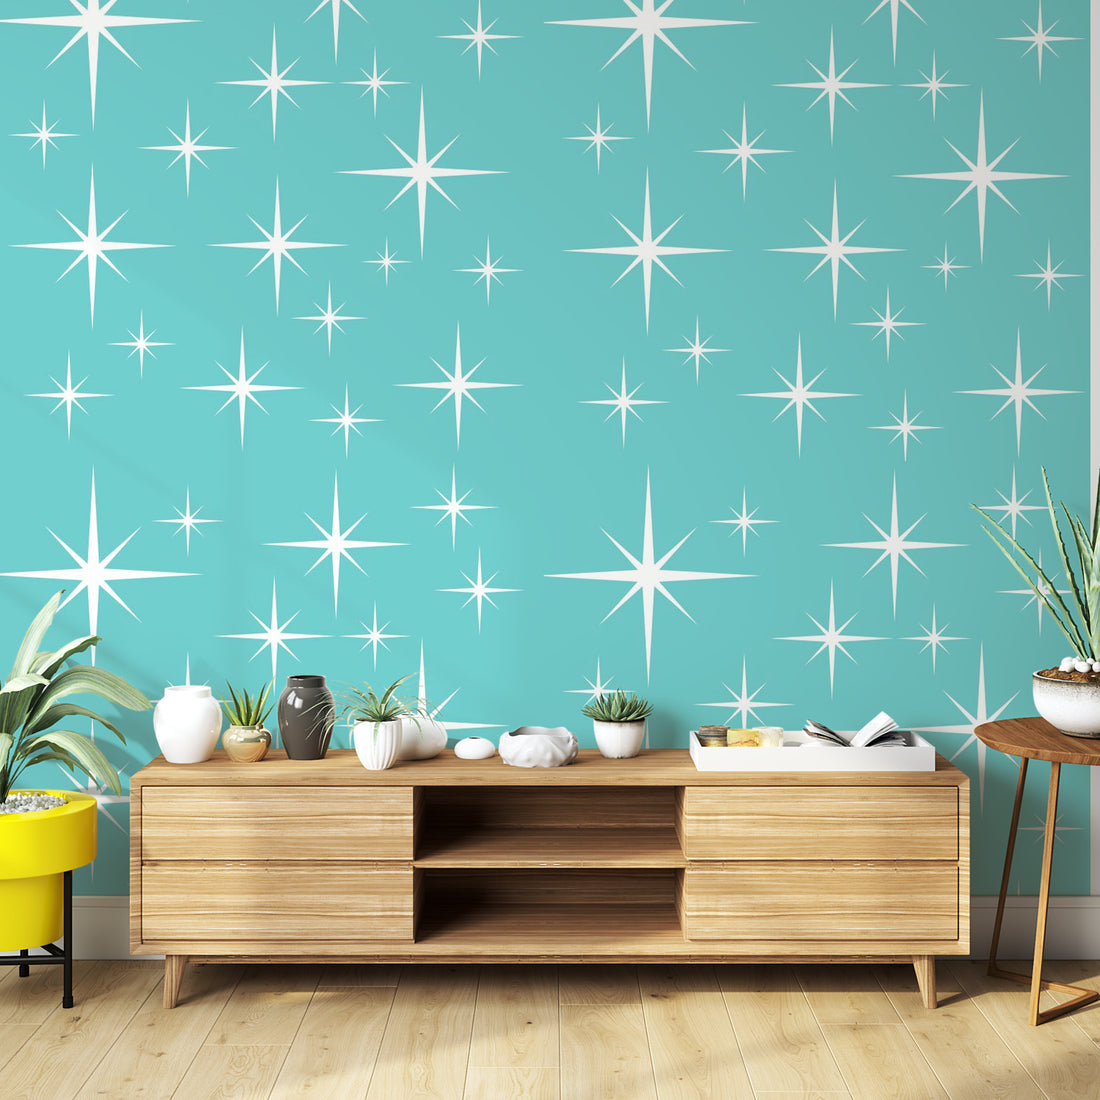 Mid Century Modern Wallpaper In Aqua And White Starbursts, Removeable, Peel And Stick Wall Murals